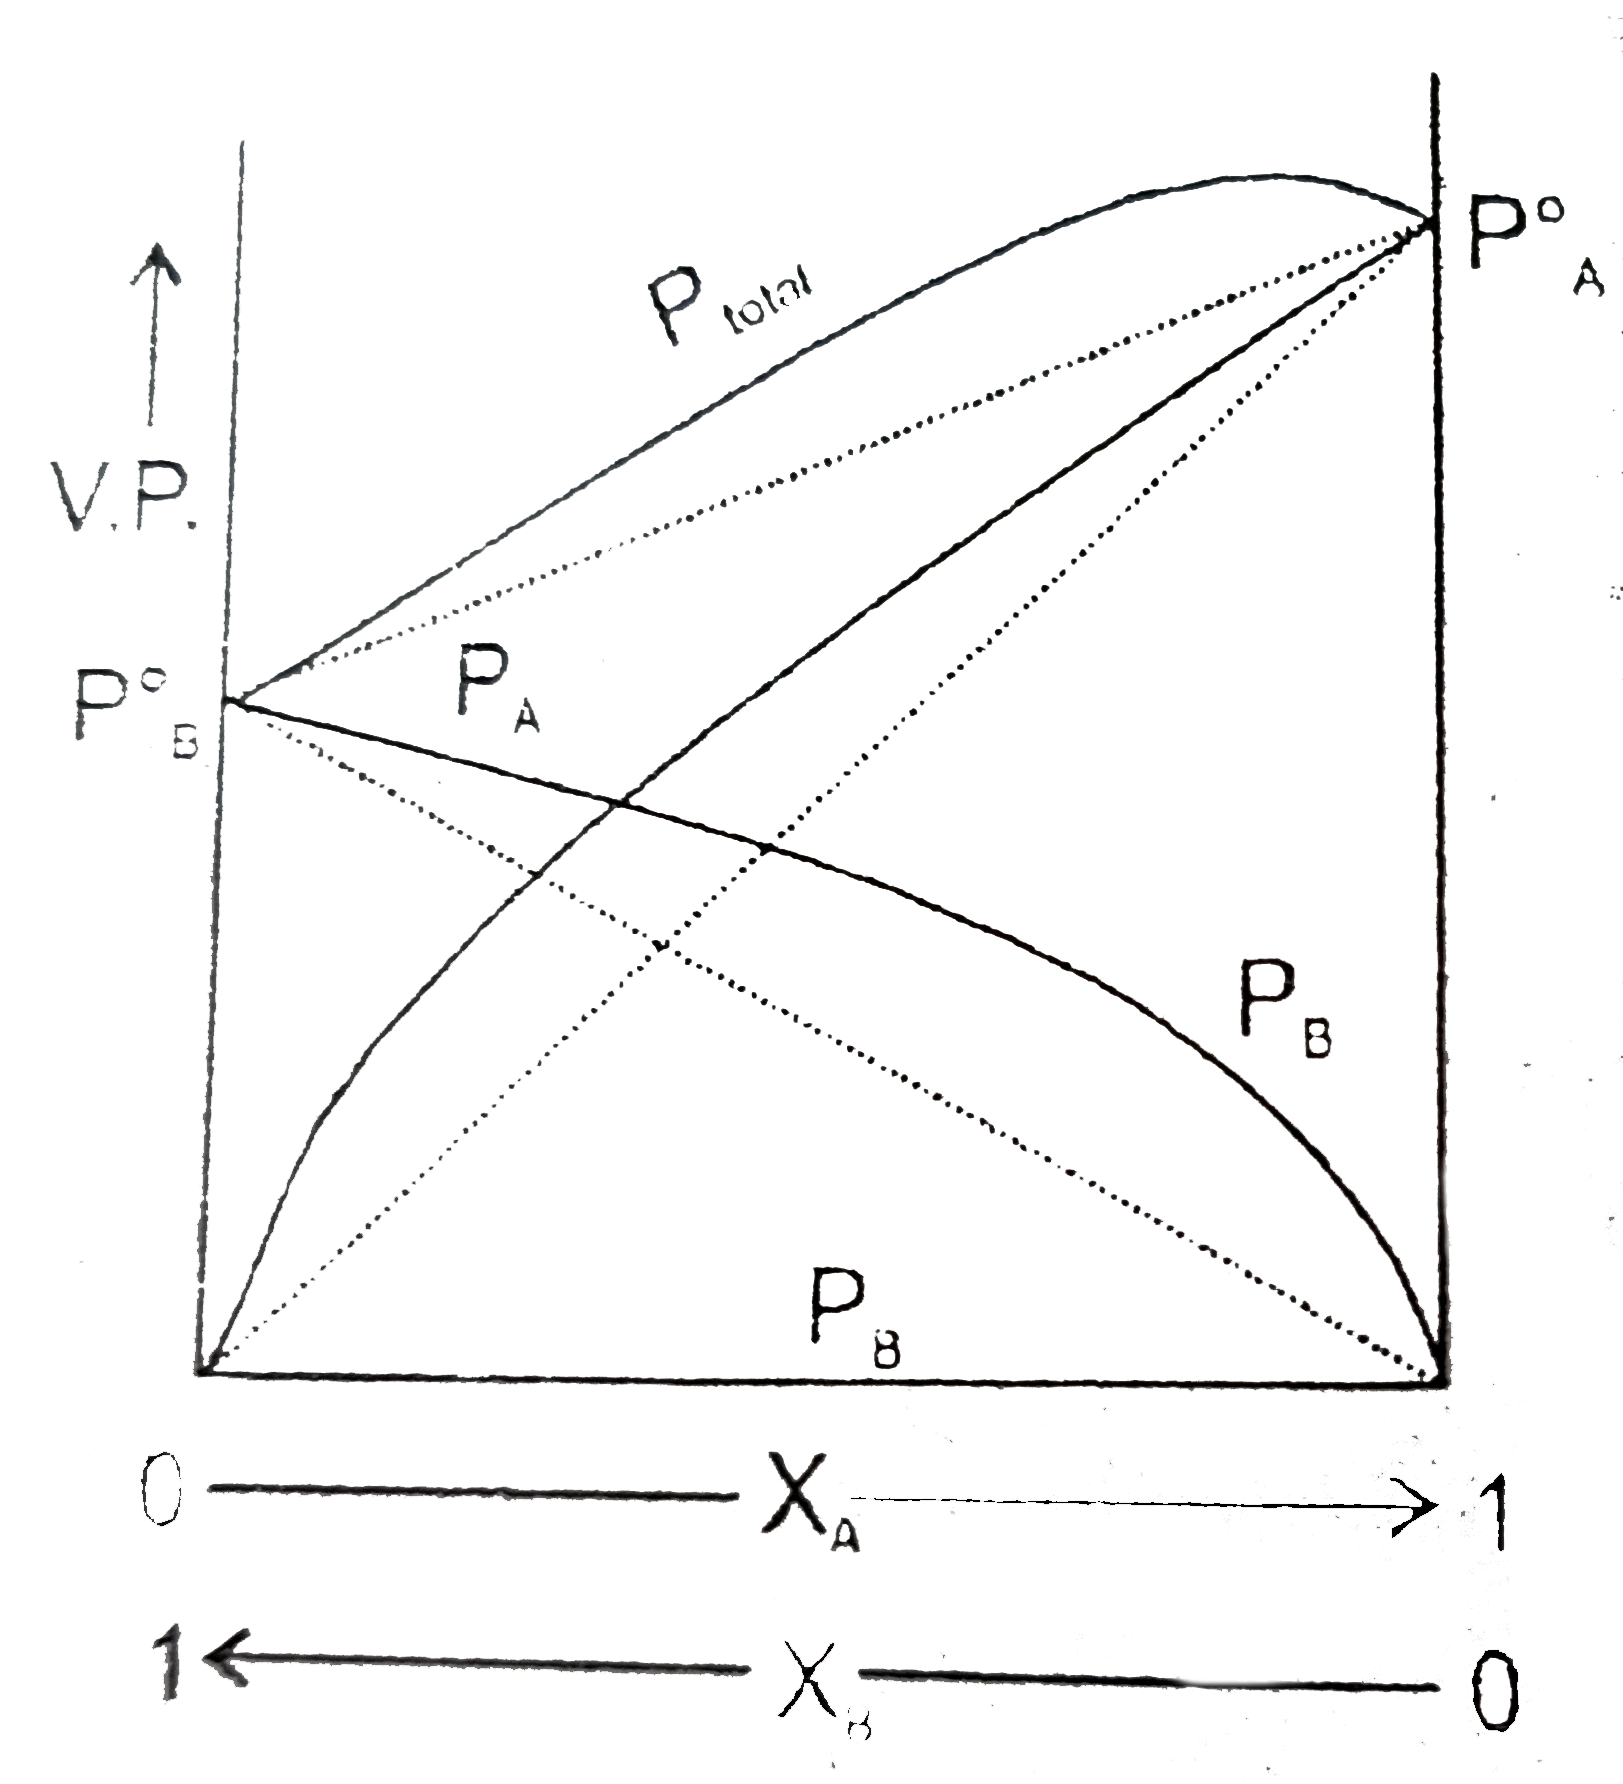 Answer the question (given below) which are based on the following diagra.    Consider some facts about the above phase diagram :   Vapour pressure diagram for real solutions of two liquids A and B that exhibit a positive deviation from Raoult's law. The vapour pressure of both A and B are greater than predicted by Raoult's law. The dashed lines lines represented the plots for ideal solutions.   A: This is observed when A...B attraction are greater than average of A...B and B...B attraction:   B: DeltaH(